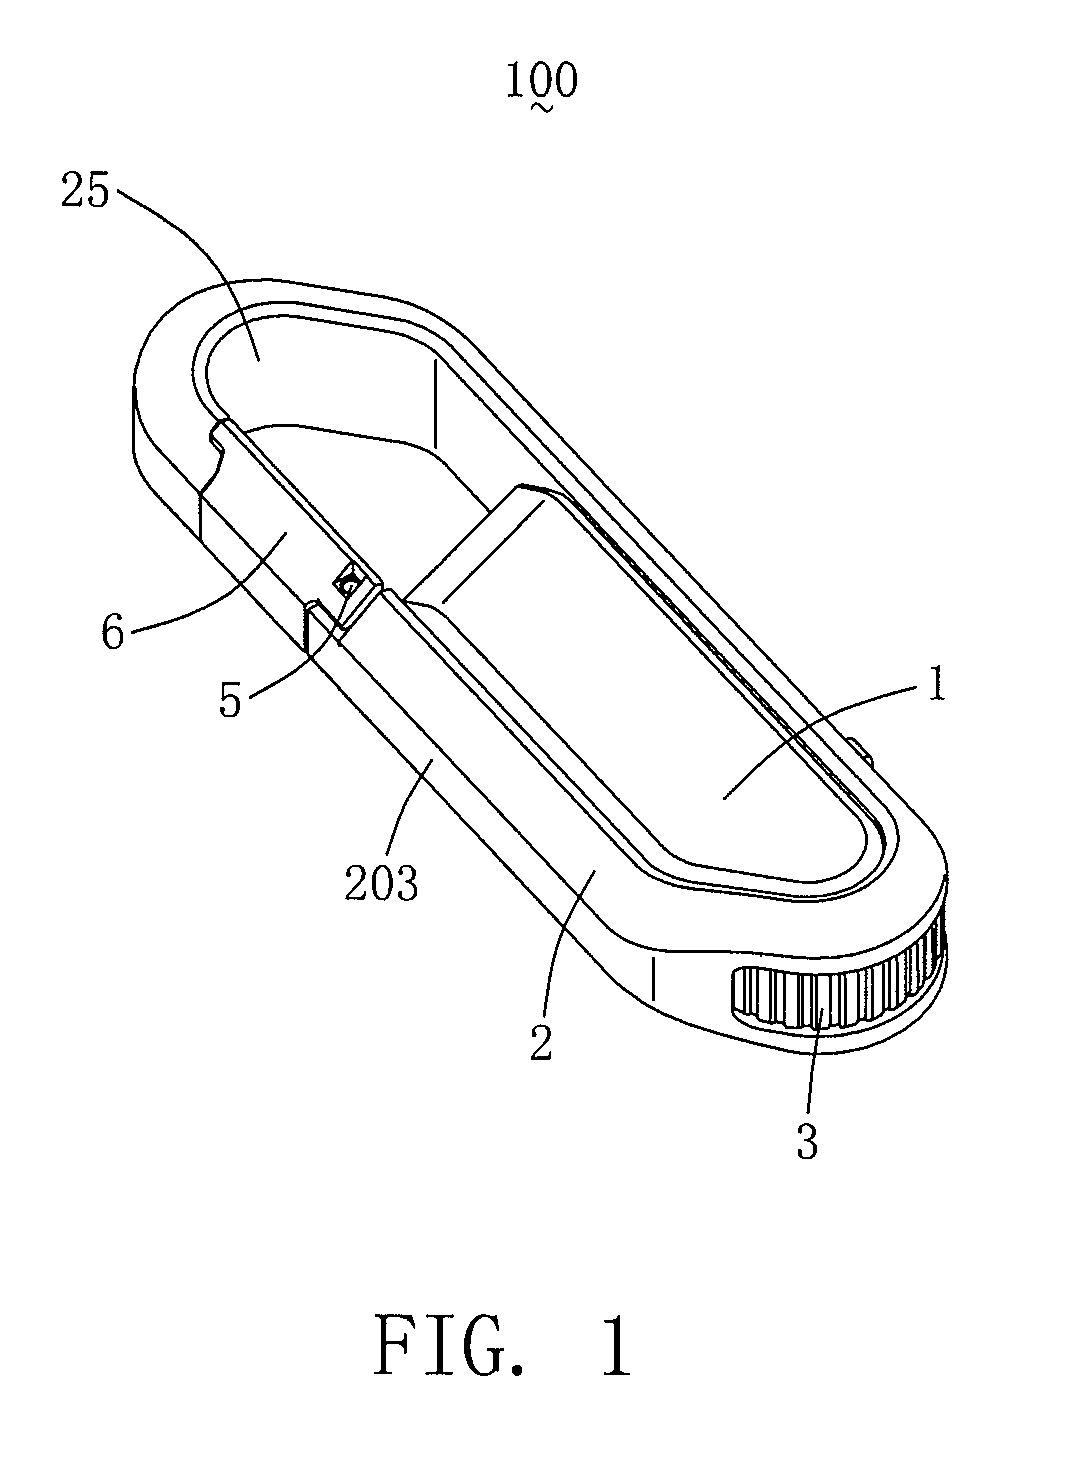 Electronic storage device having multiple-direction rotation and allocation electrical connector